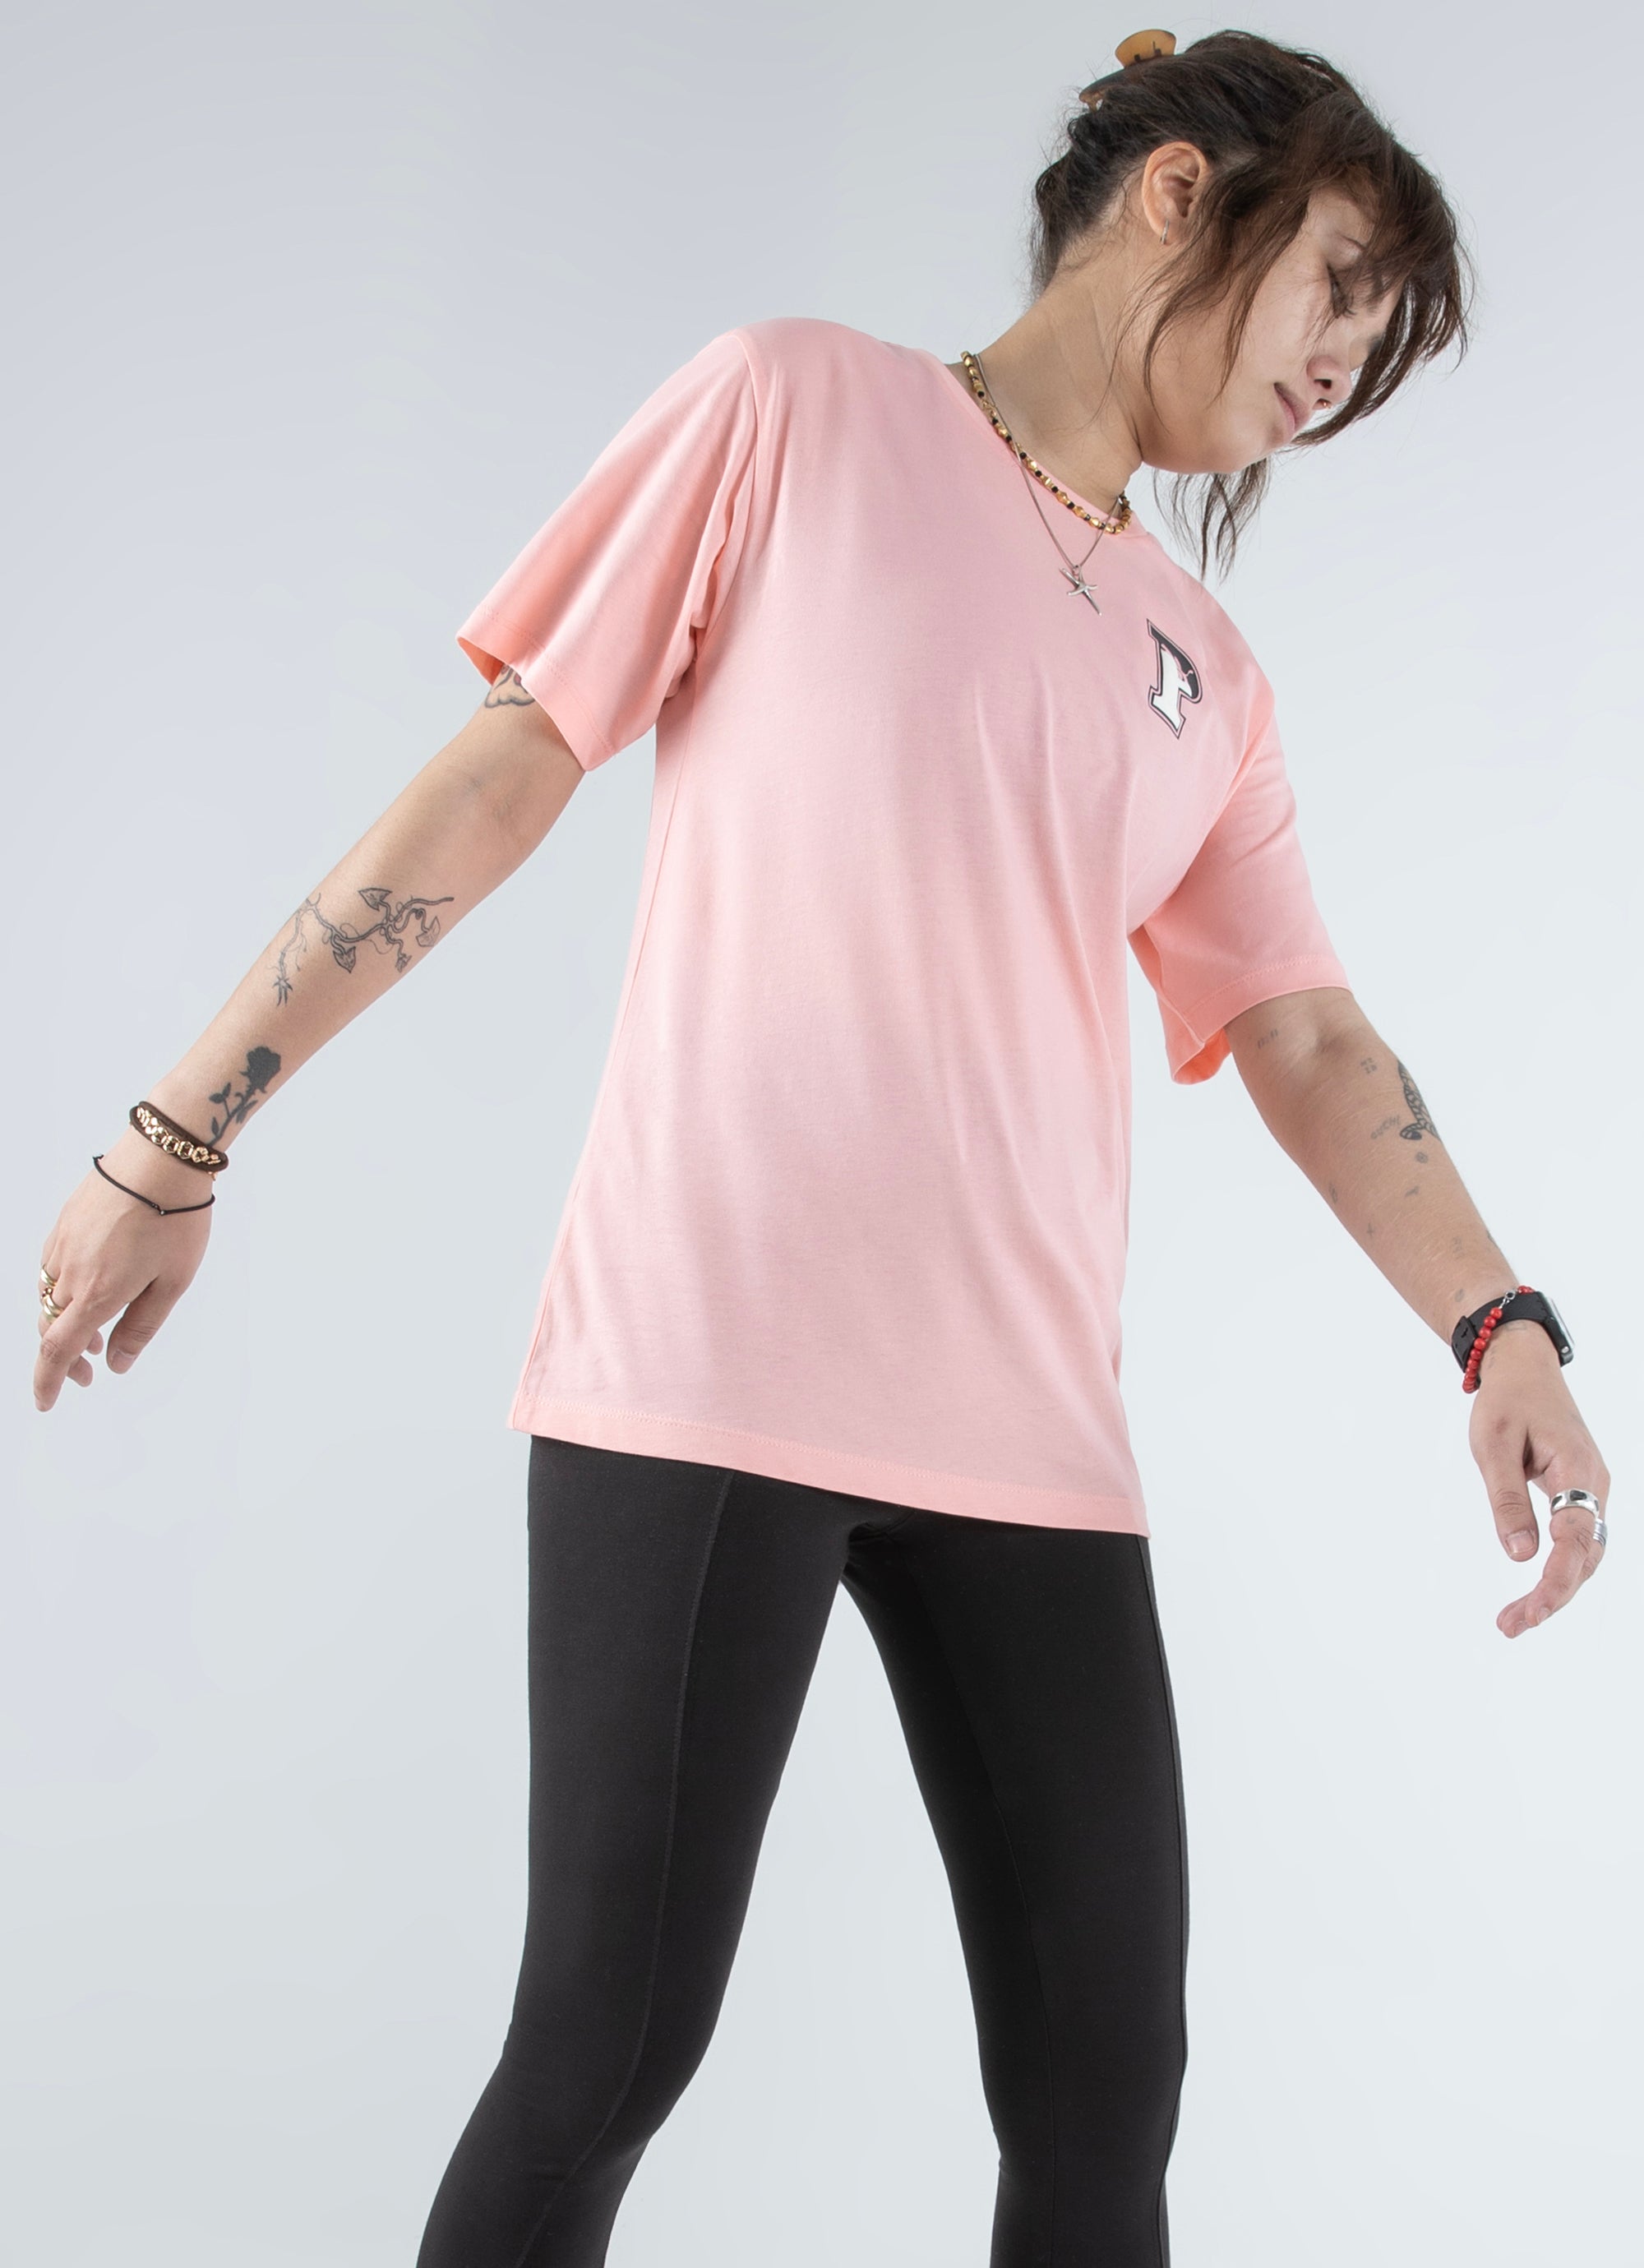 Puma Squad Tee - Womens in Pink Rat Red 